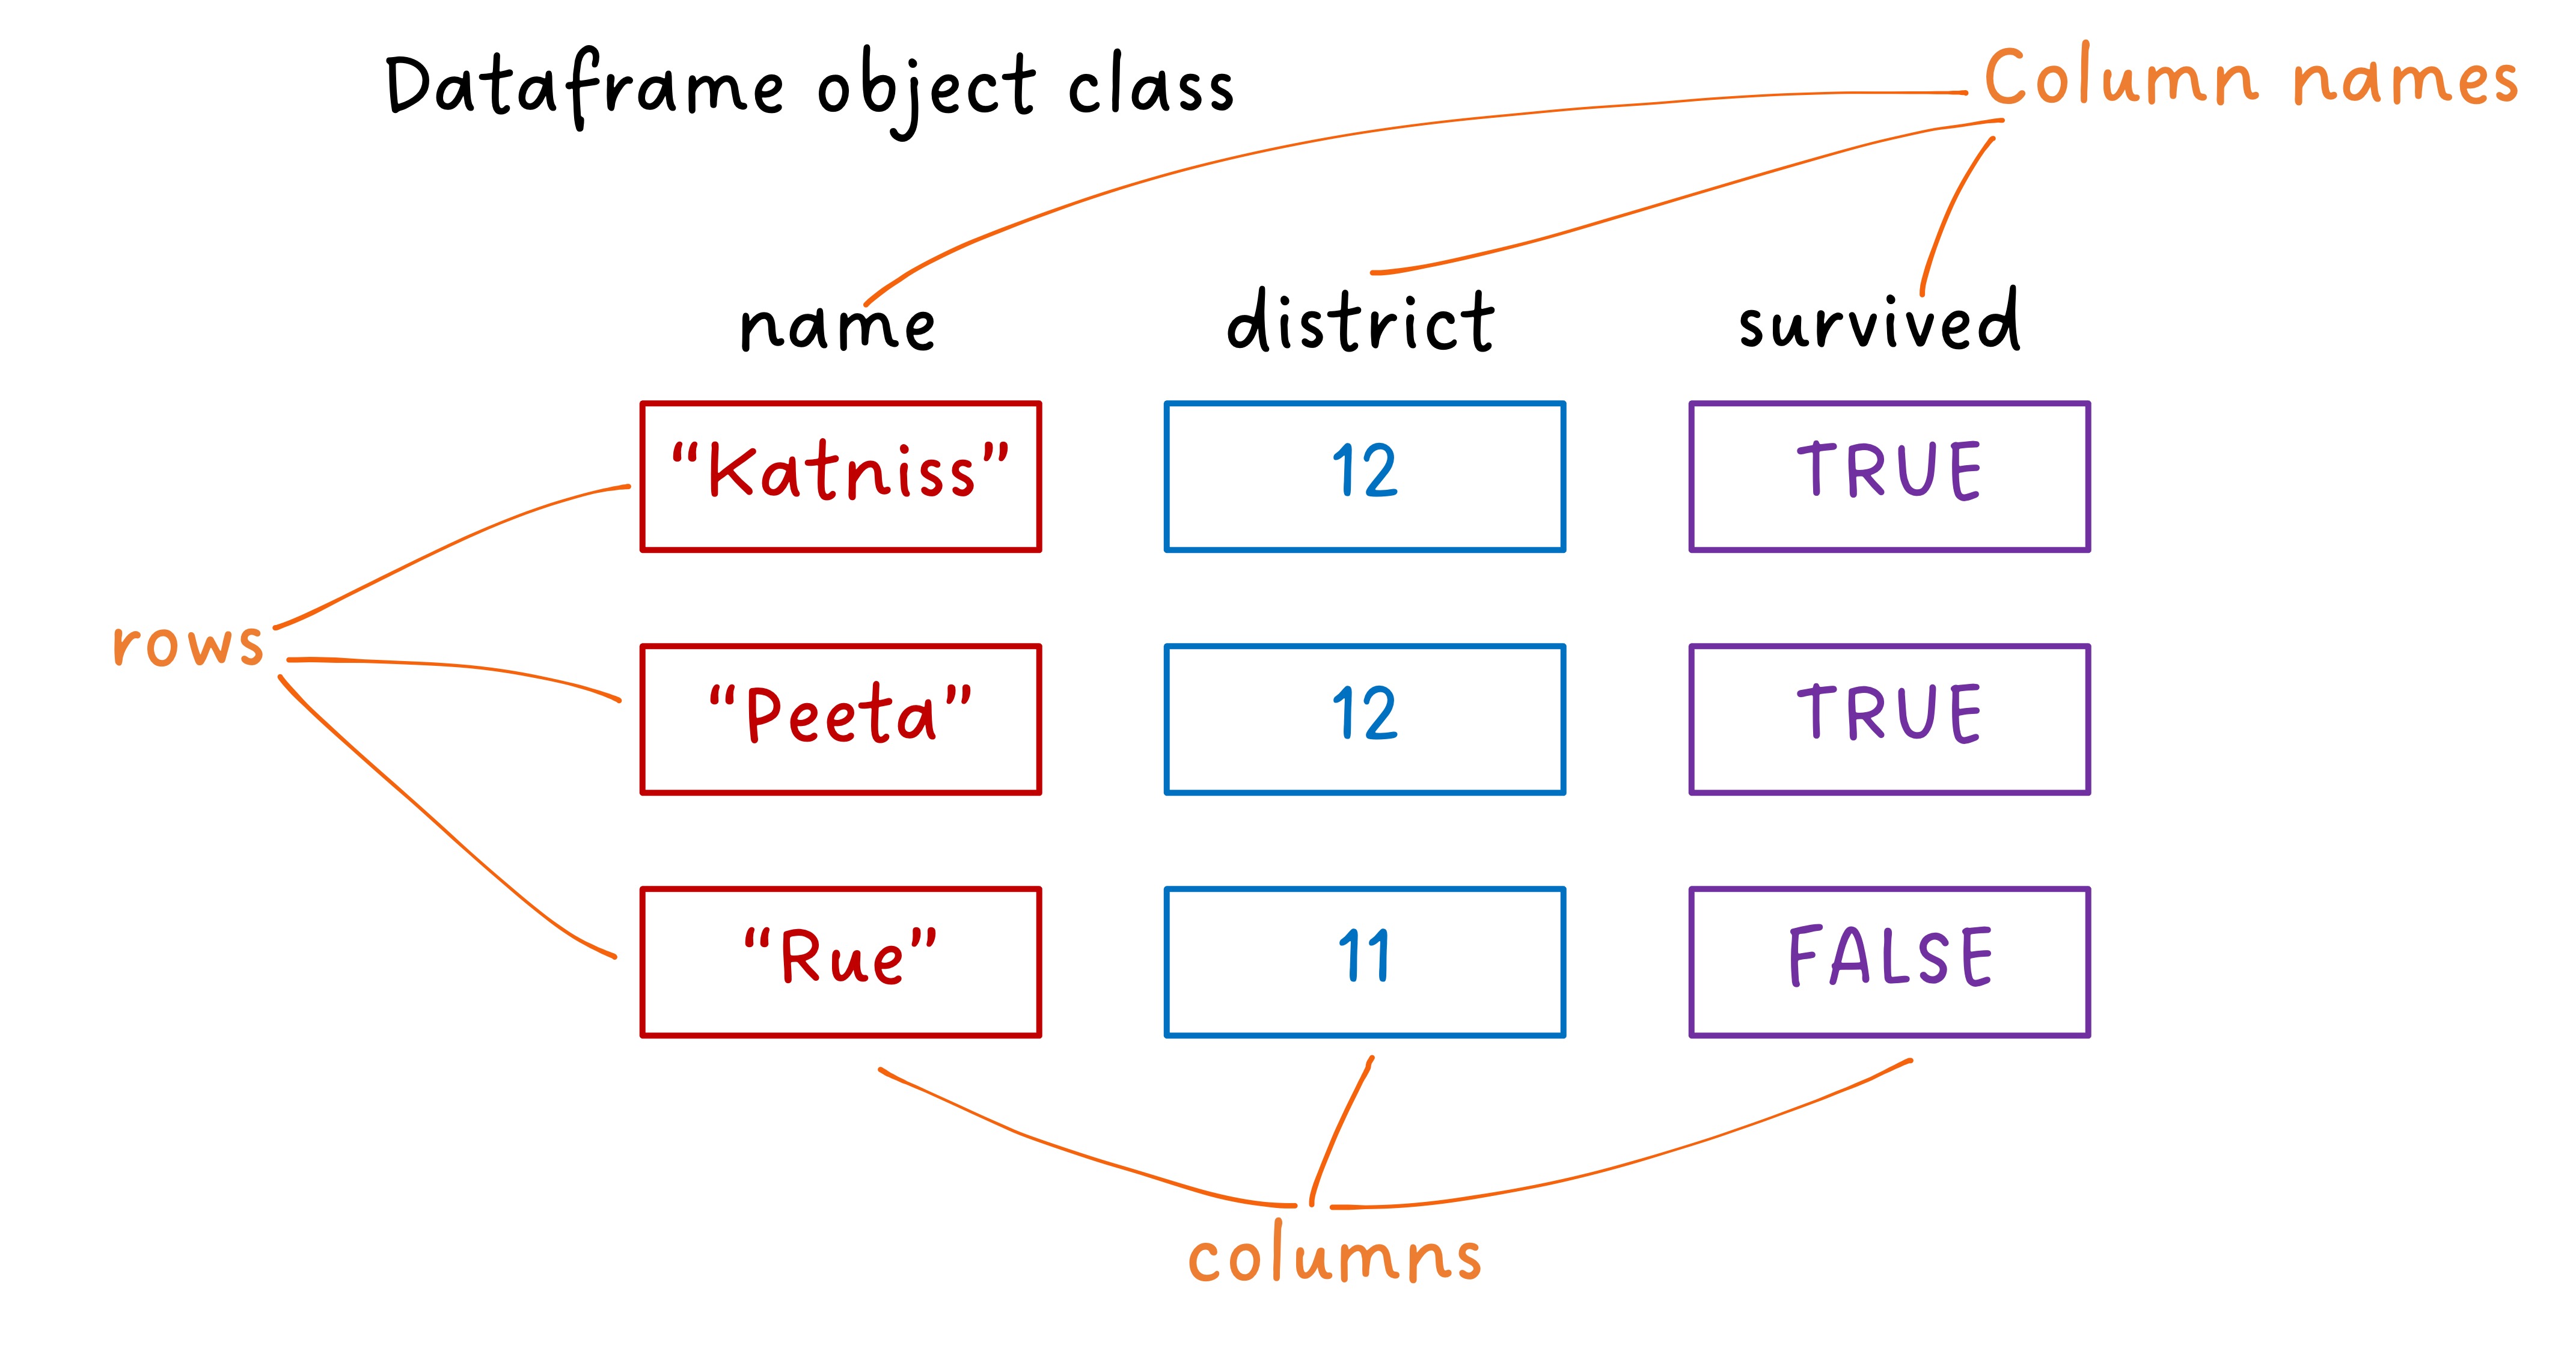 The elements of a dataframe: columns, rows, and column names.